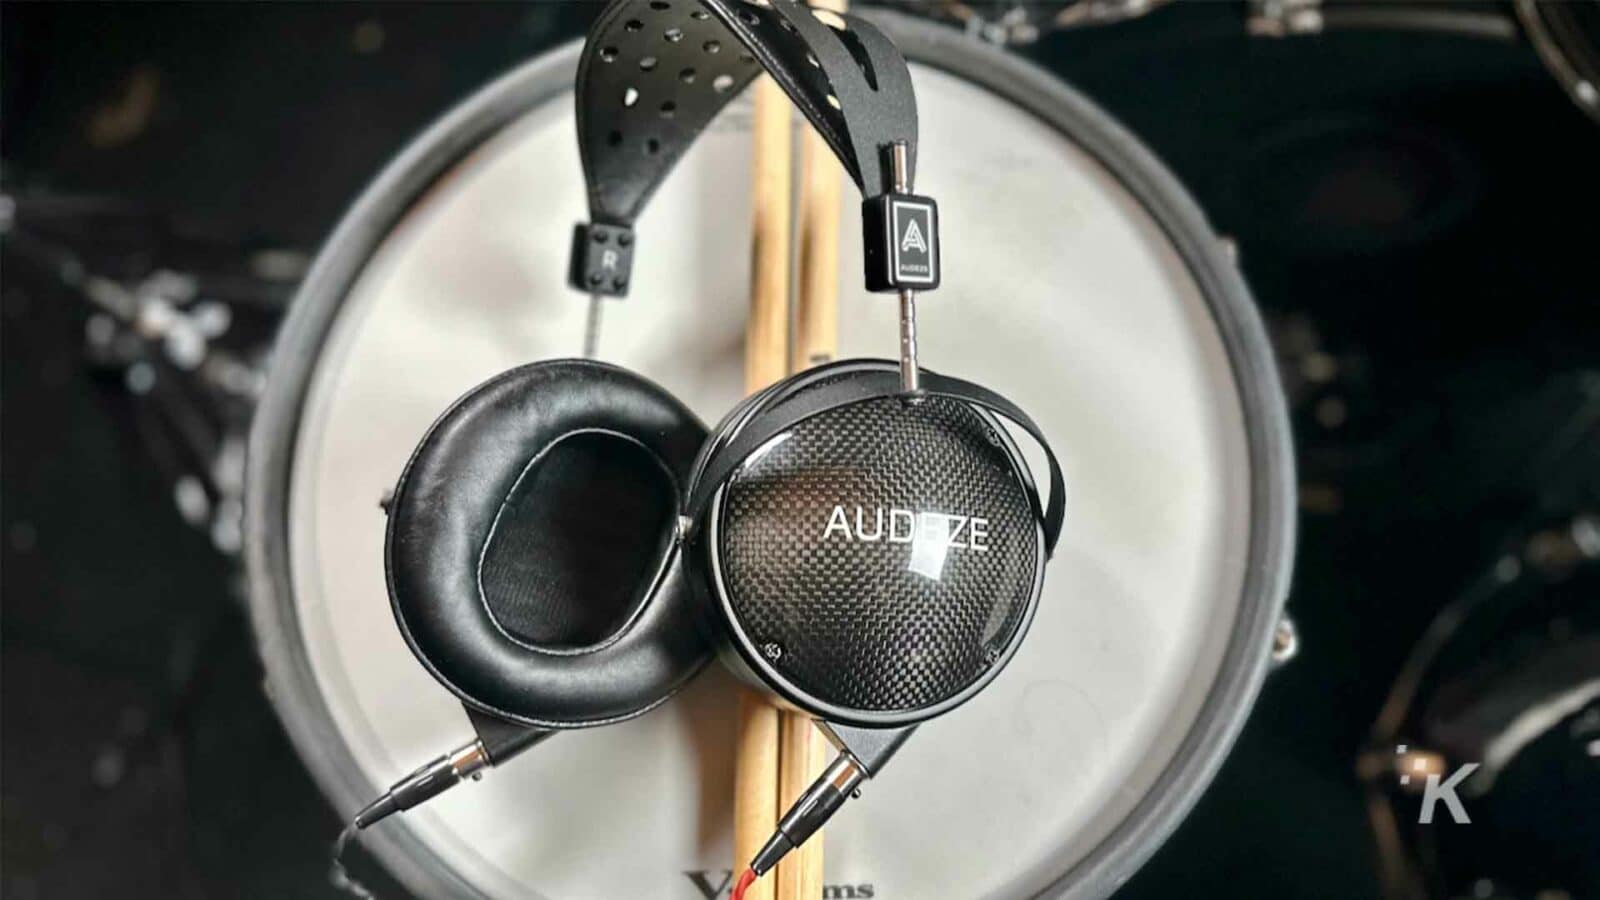 A drummer plays a percussion instrument while wearing headphones and listening to music through a loudspeaker connected to audio equipment with Audeze headphones.